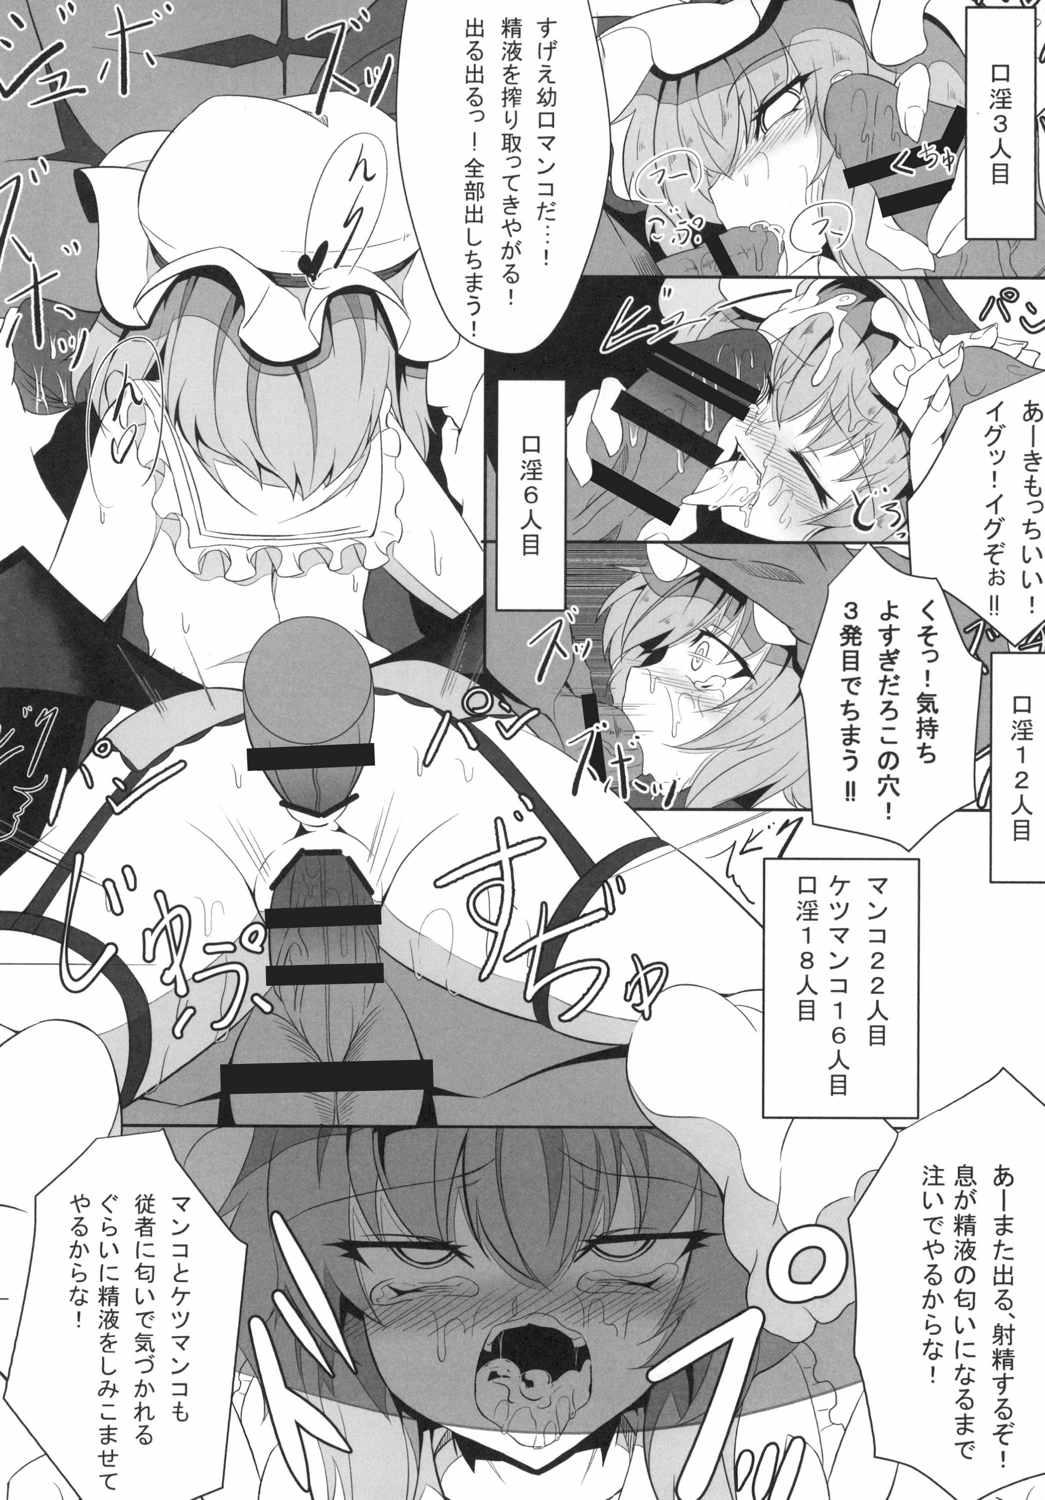 Eating M.P. Vol. 4 - Touhou project Gostoso - Page 11